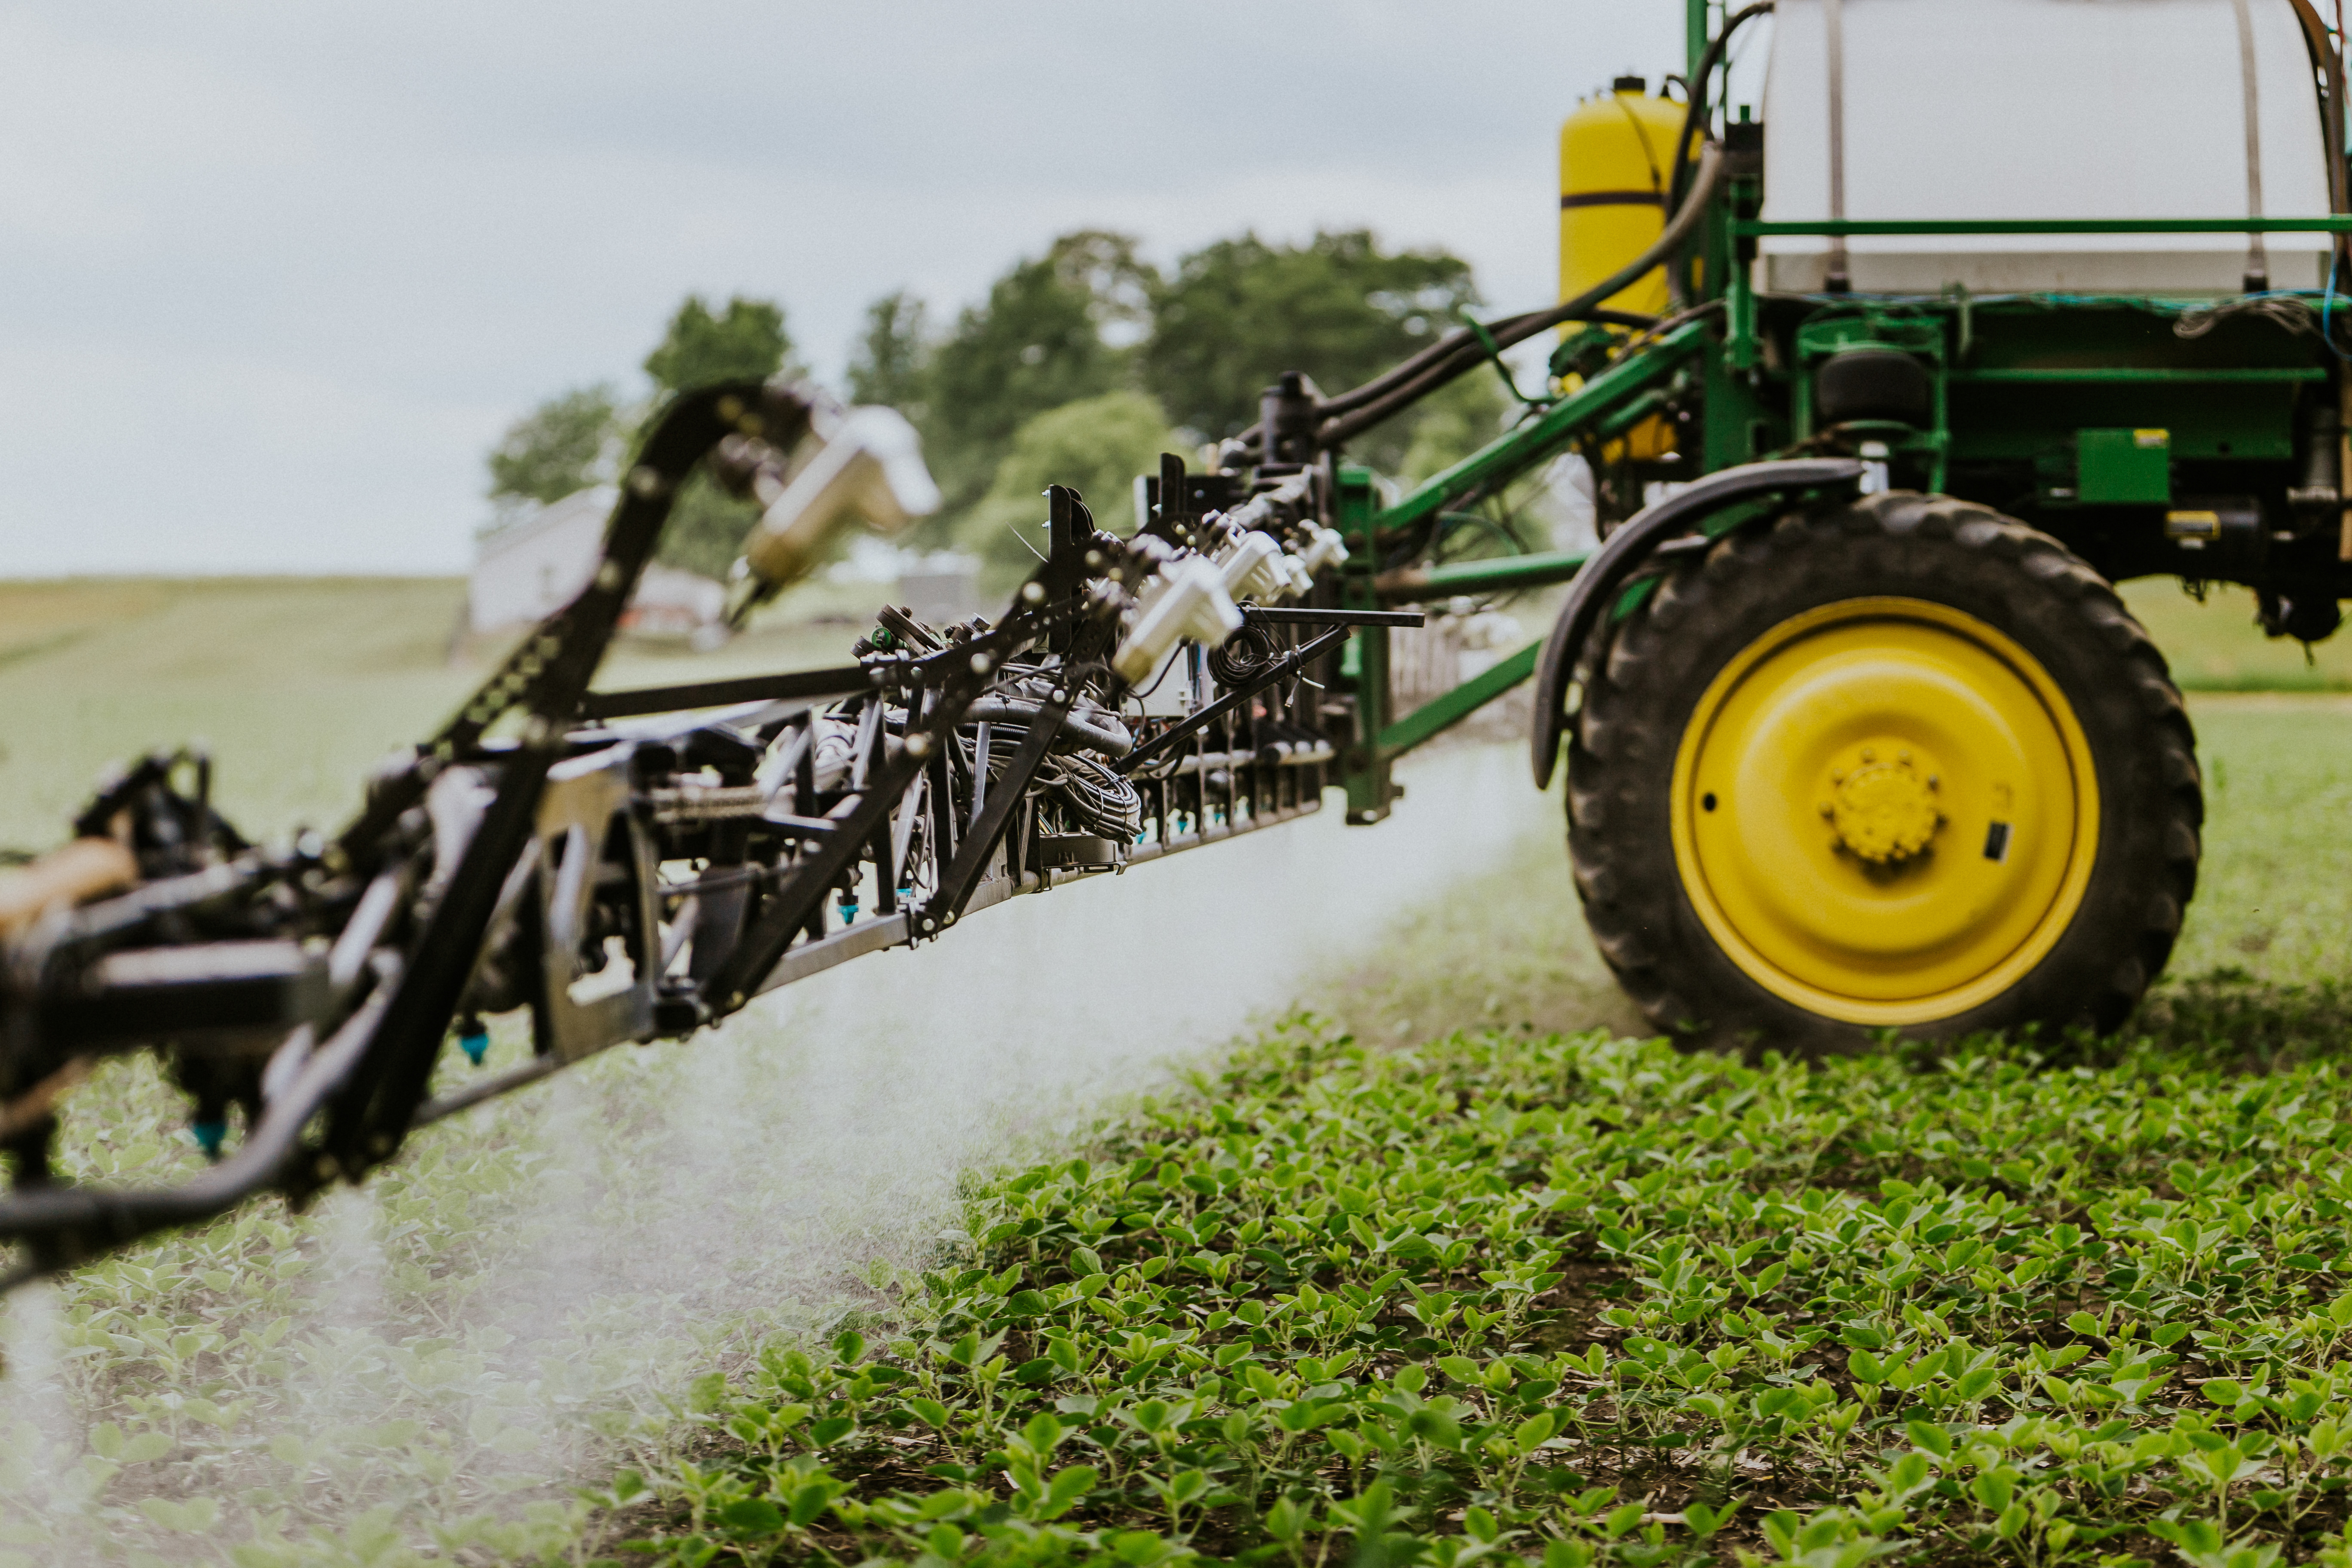 Close up image of a sprayer beam applying weed control